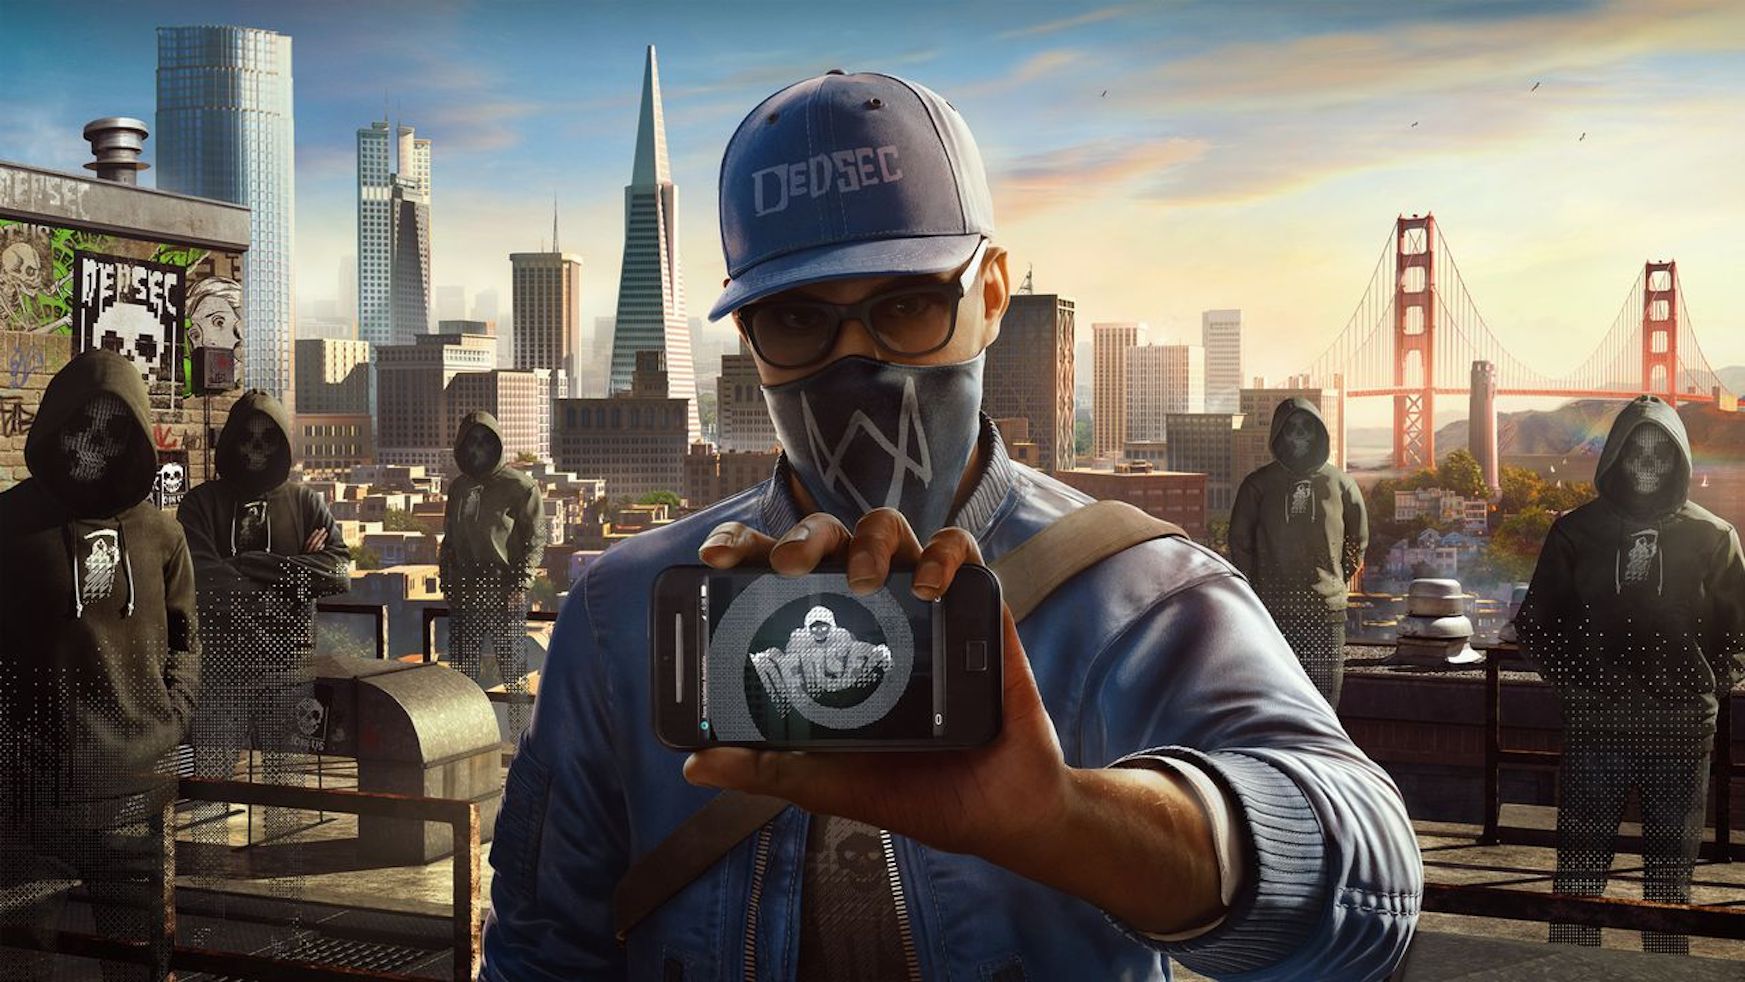 uplay watch dogs 2